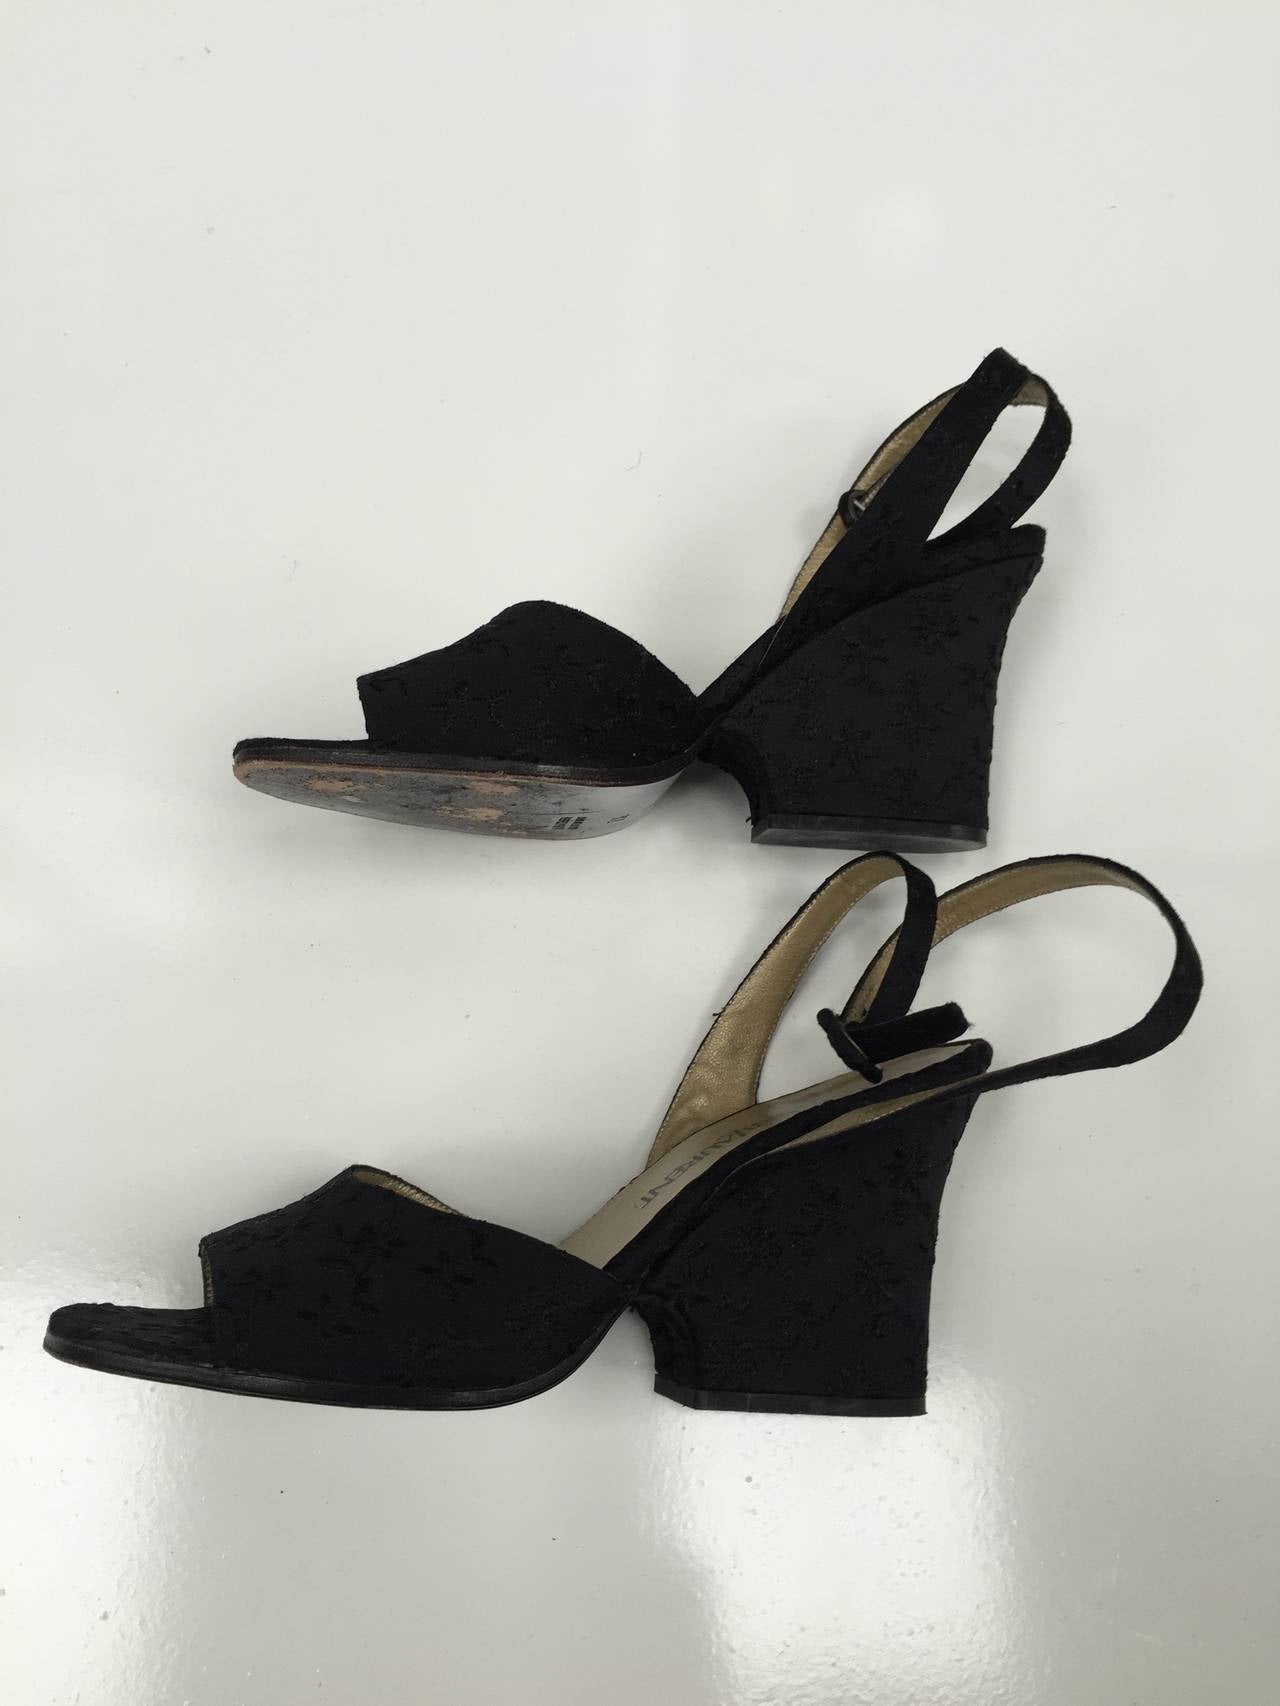 Yves Saint Laurent 1980s Black Ankle Strap Shoes Size 7.5 M. In Good Condition For Sale In Atlanta, GA